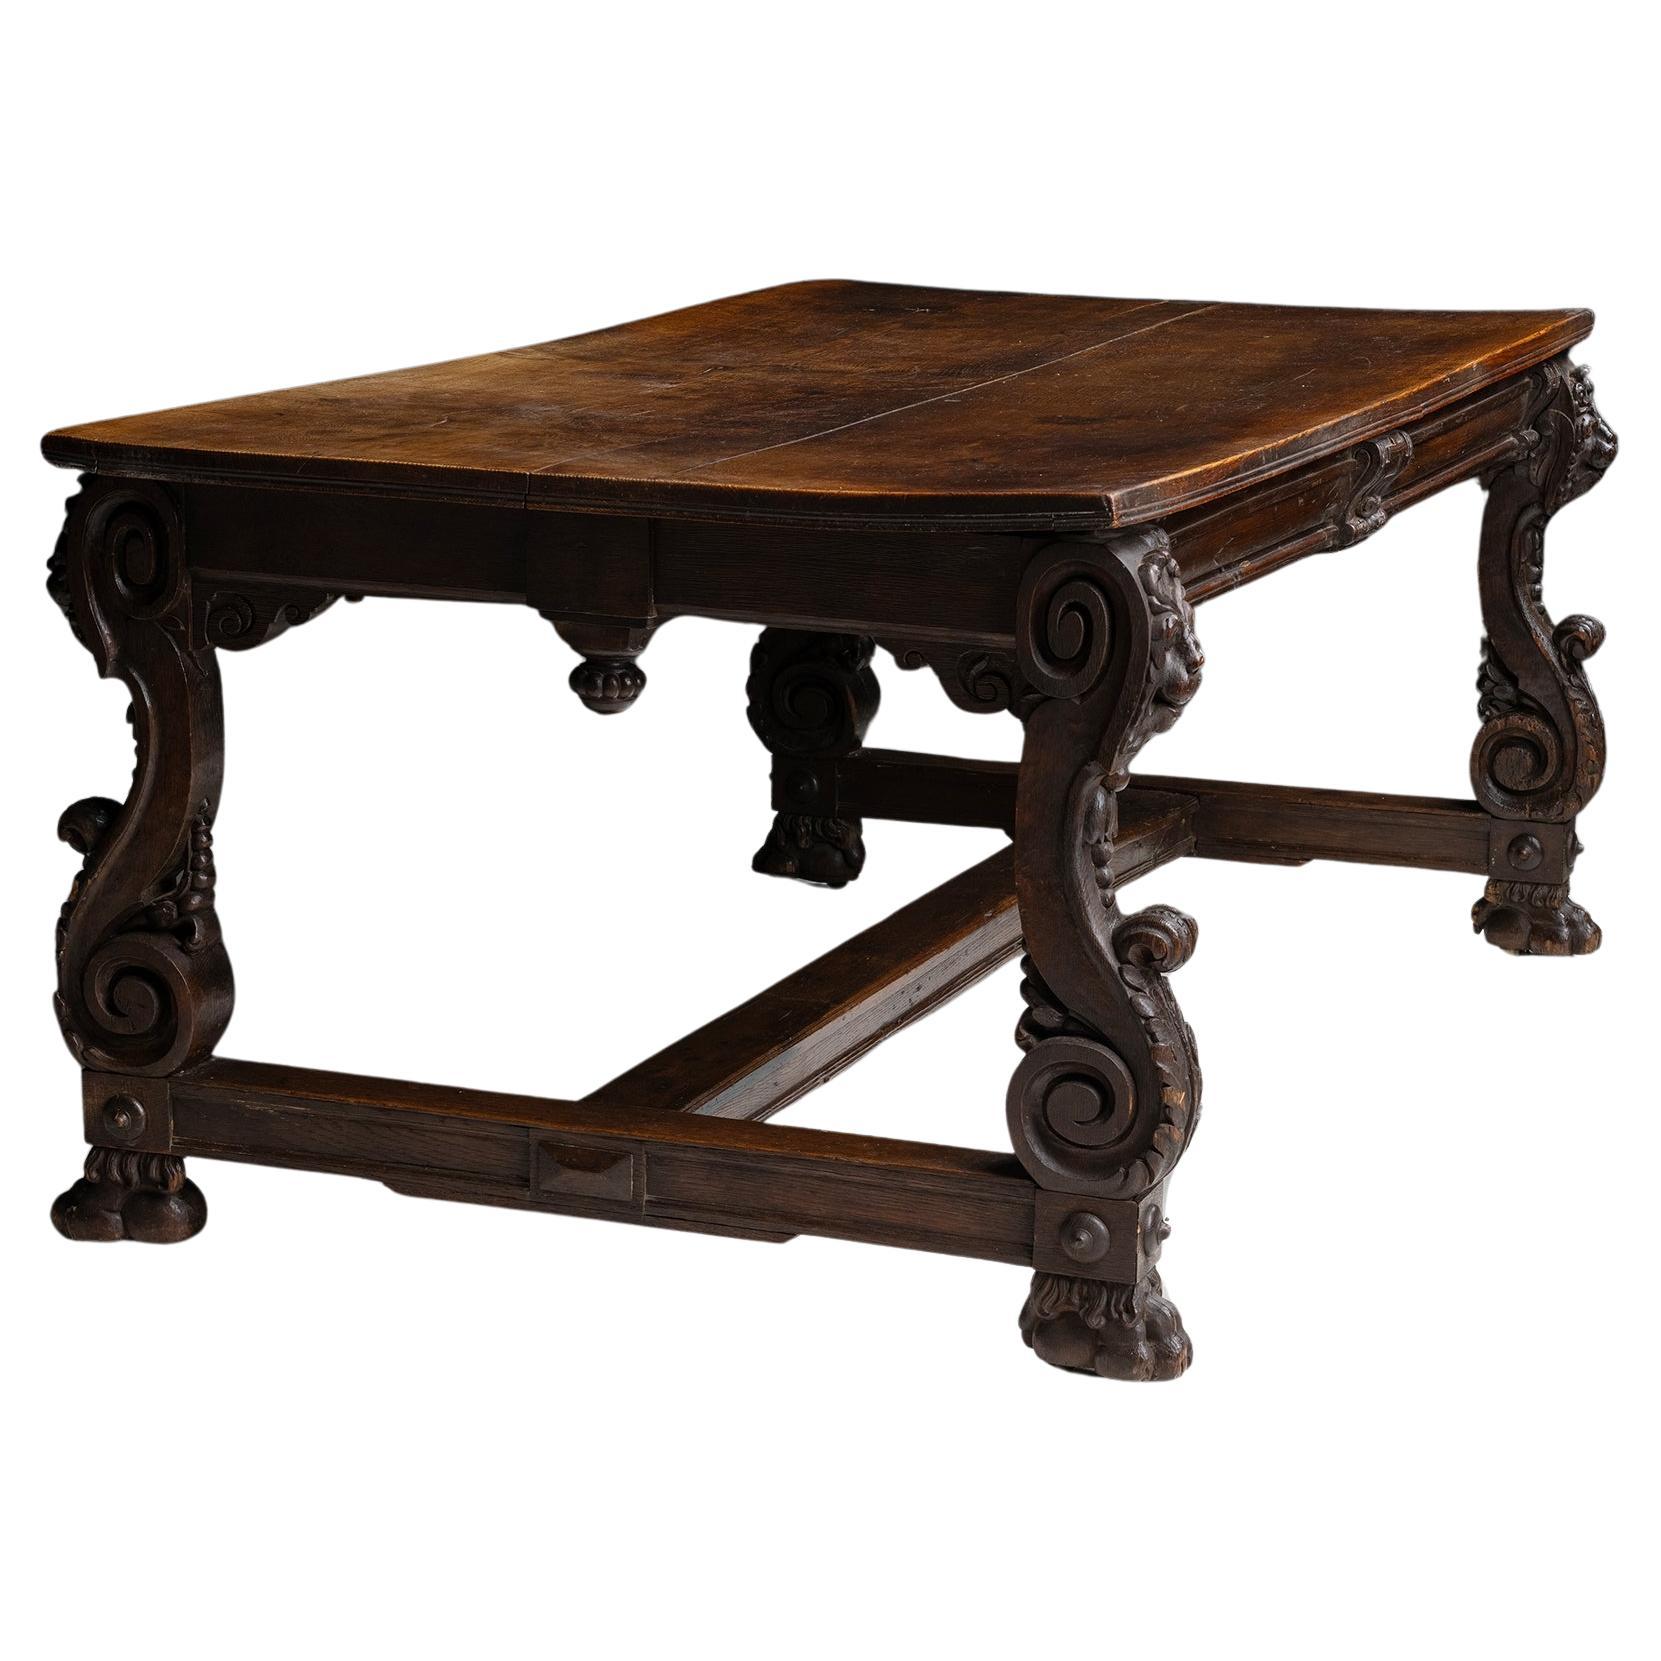 Gothic Refectory Table, Italy circa 1870